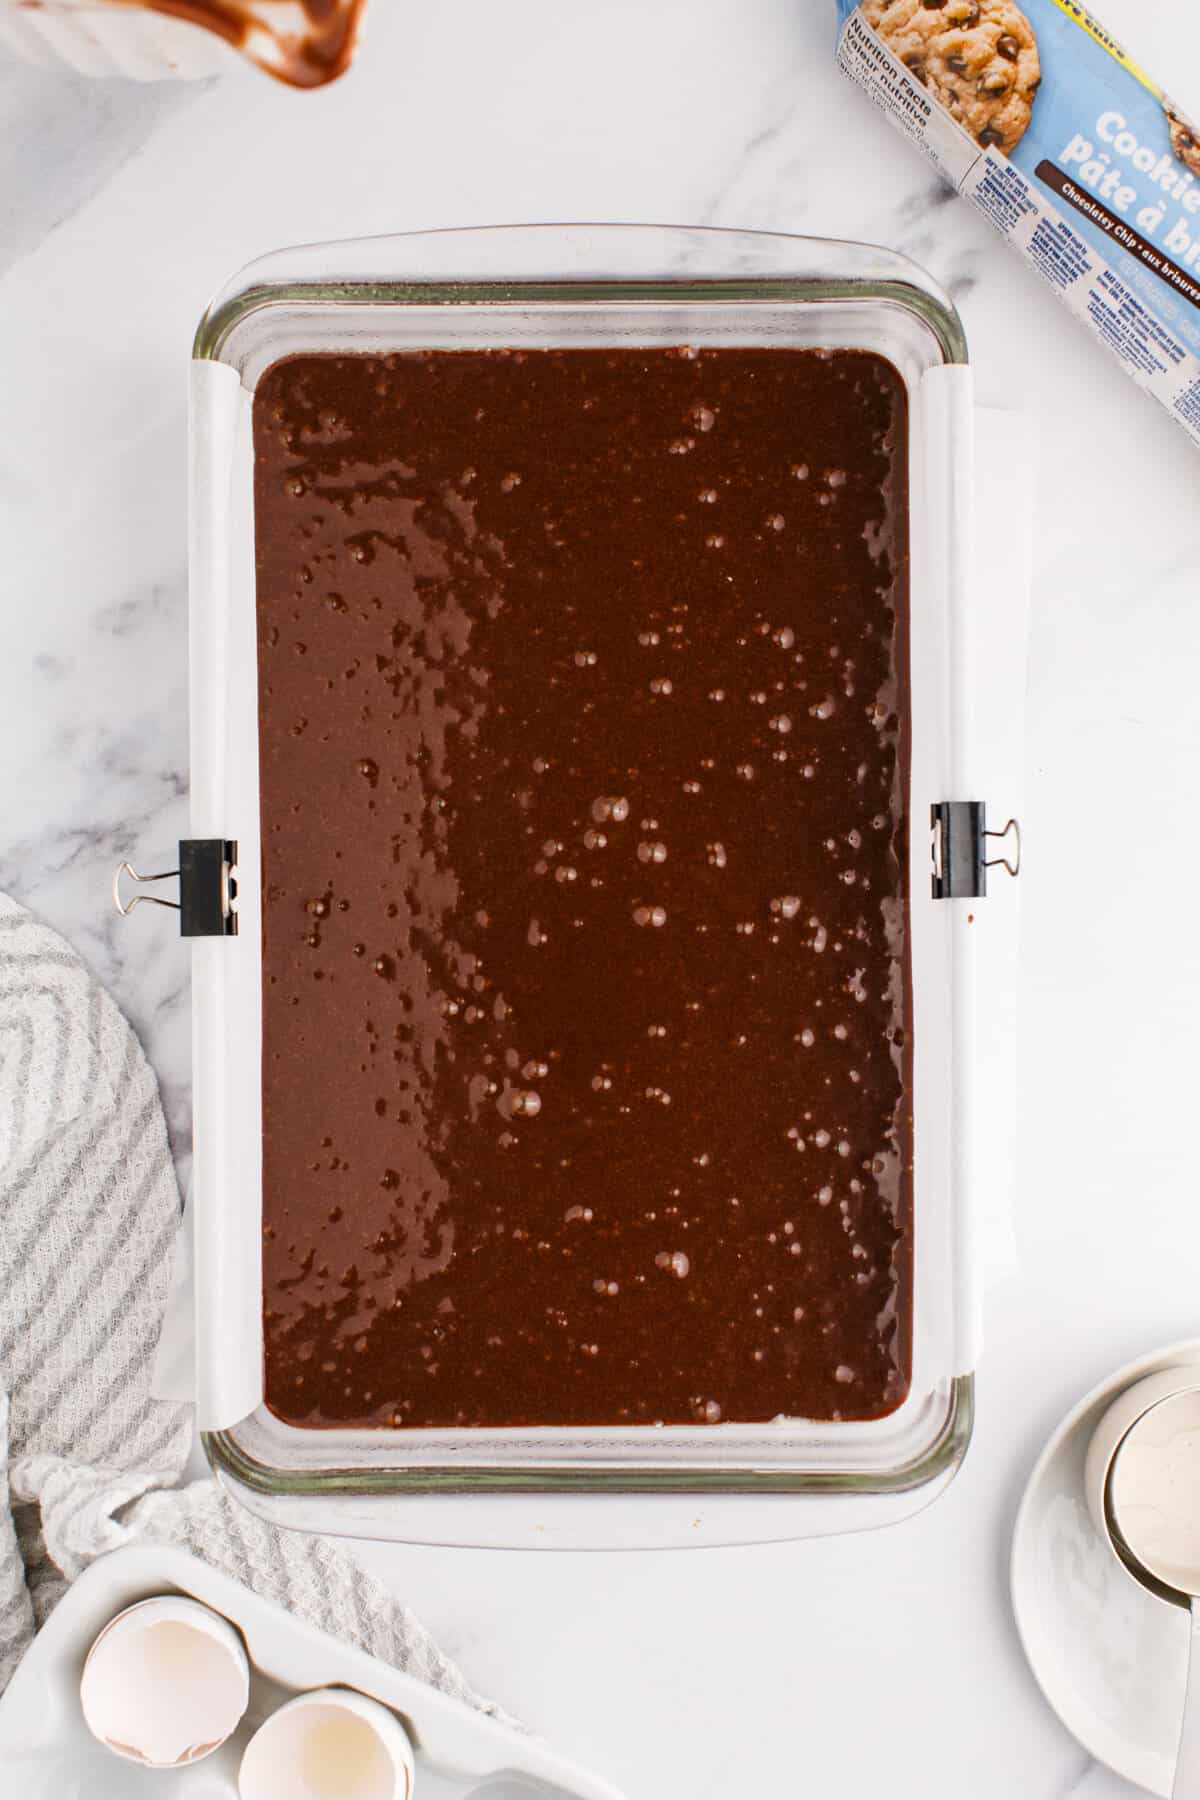 Brownie layer in pan.